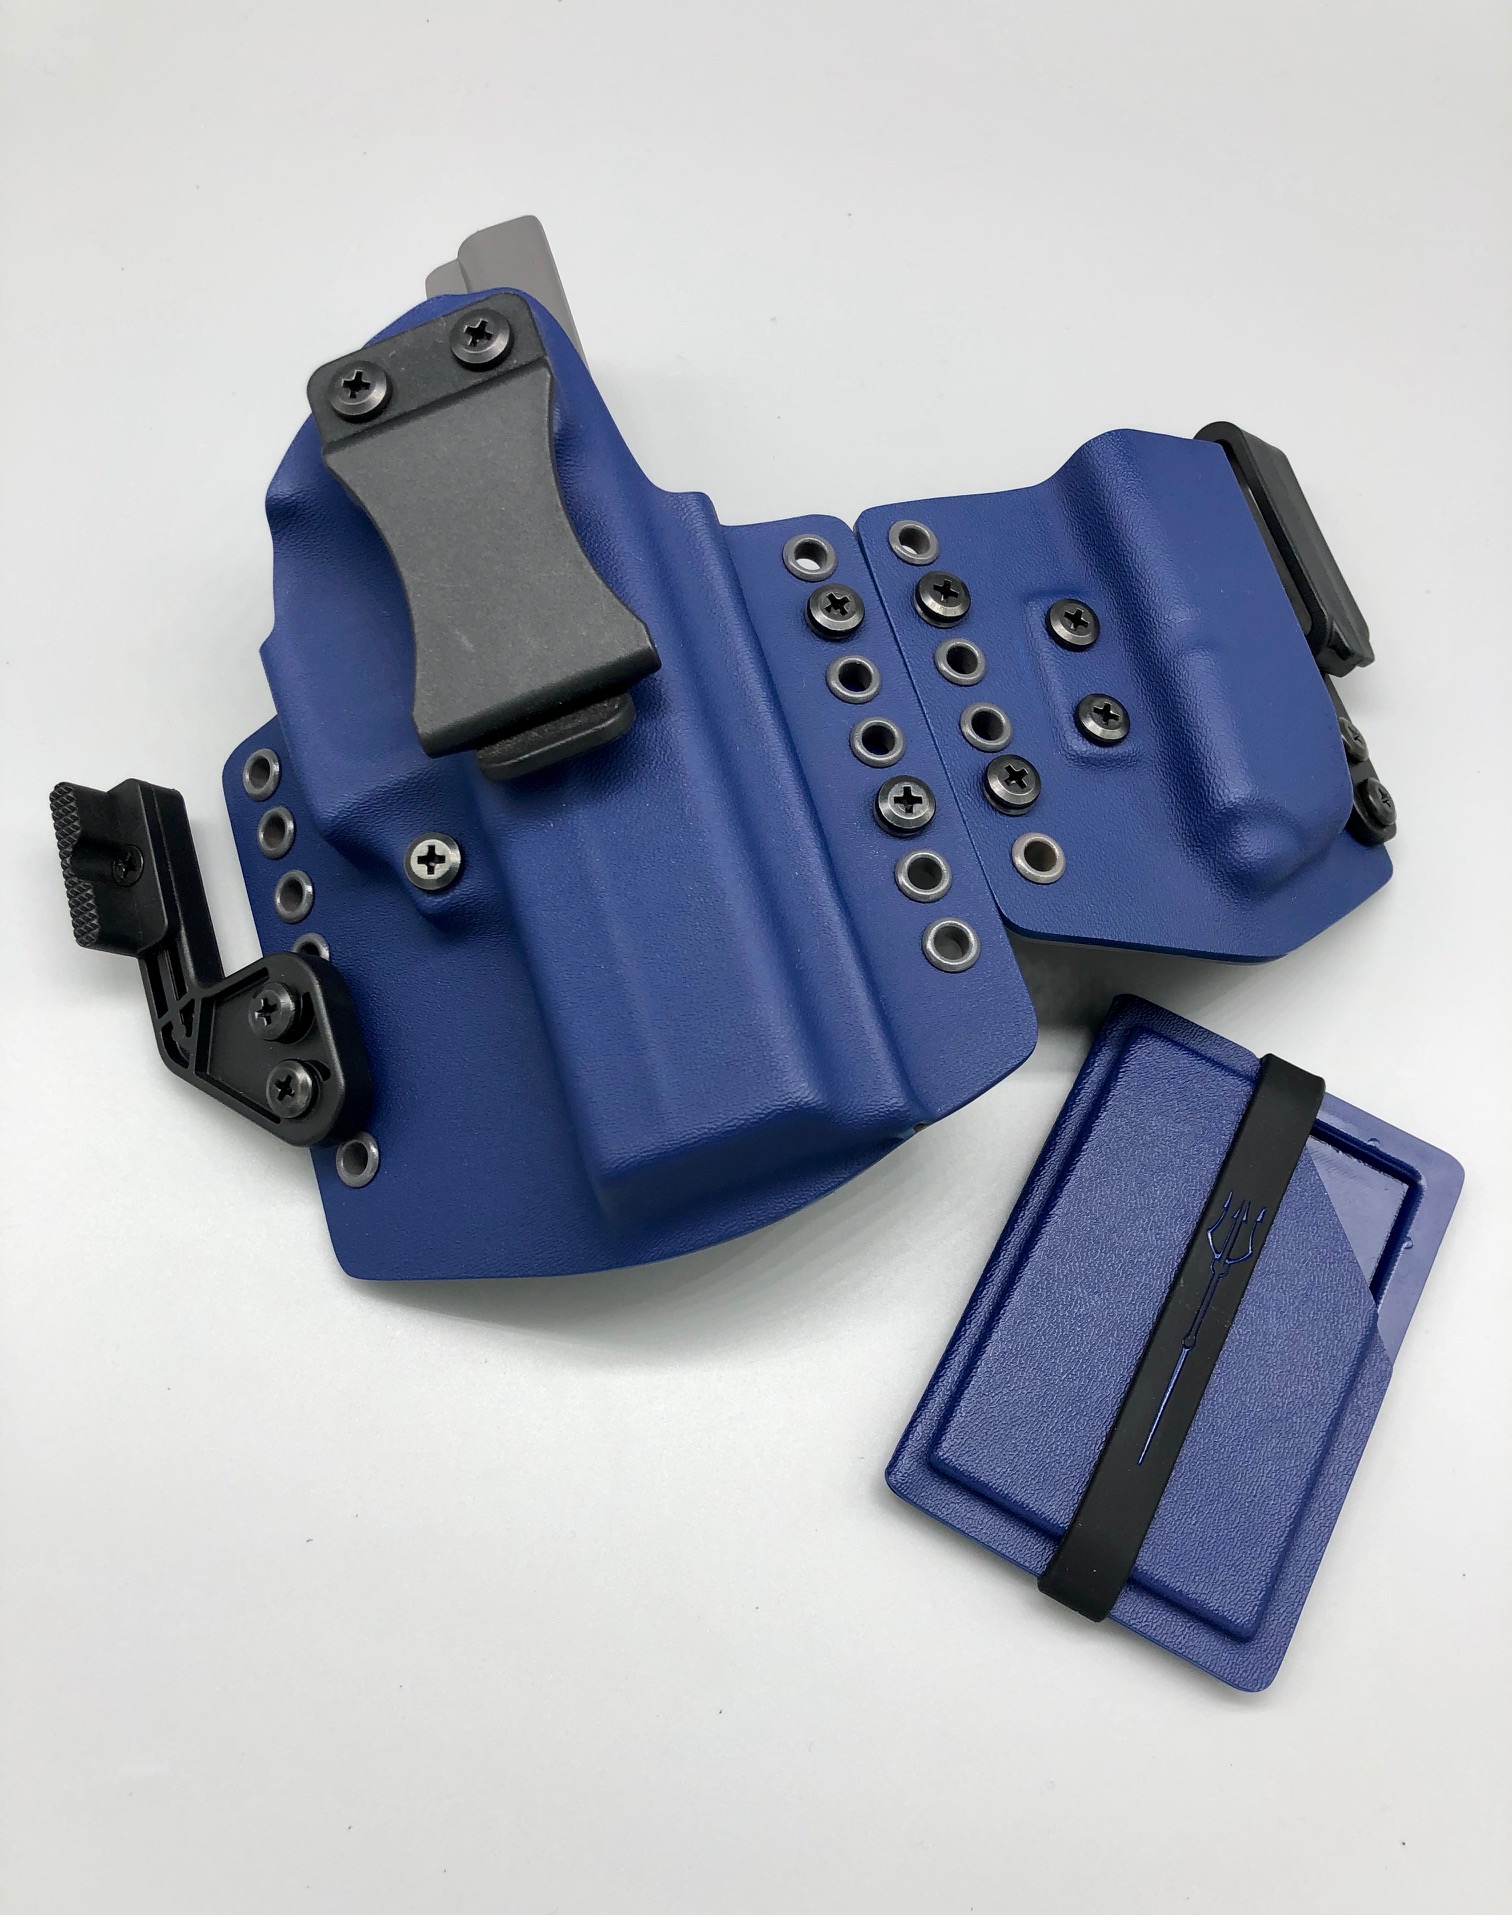 Glock 19 IWB Kydex holster With Mag Carrier Details about   FITS 